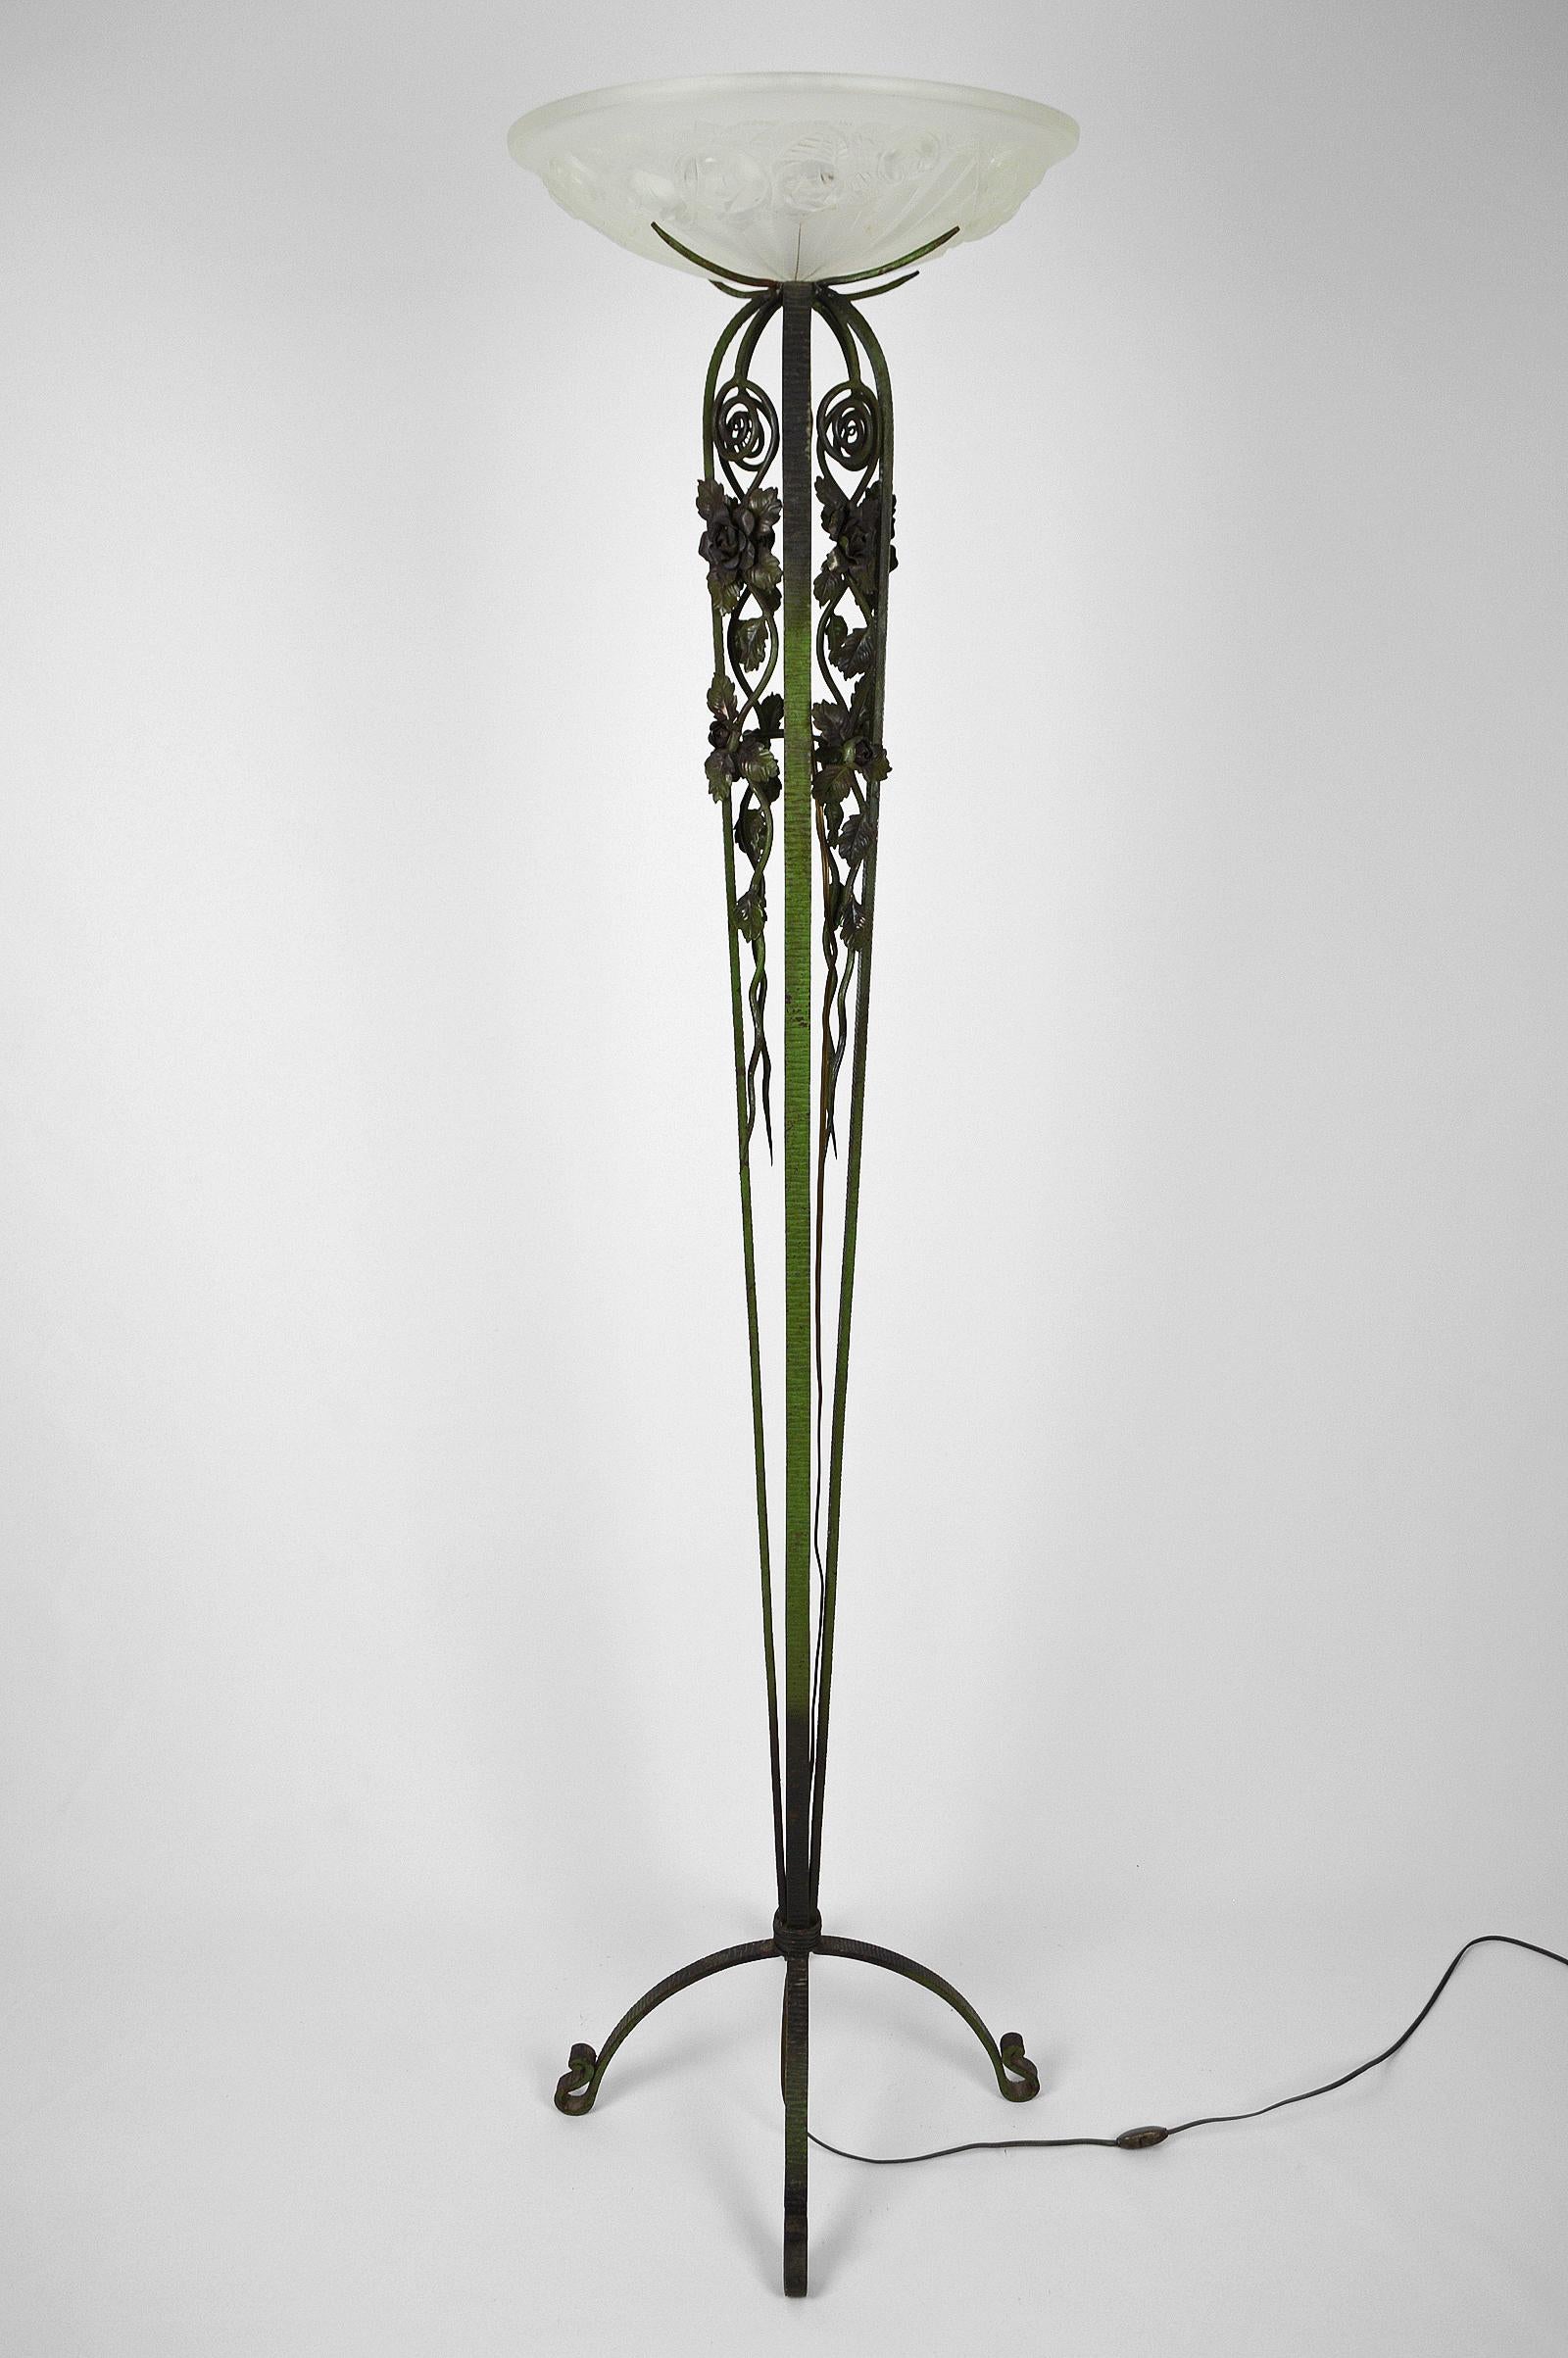 Mid-20th Century Art Deco Floor Lamp in Wrought Iron and Green Patina, France, circa 1930 For Sale